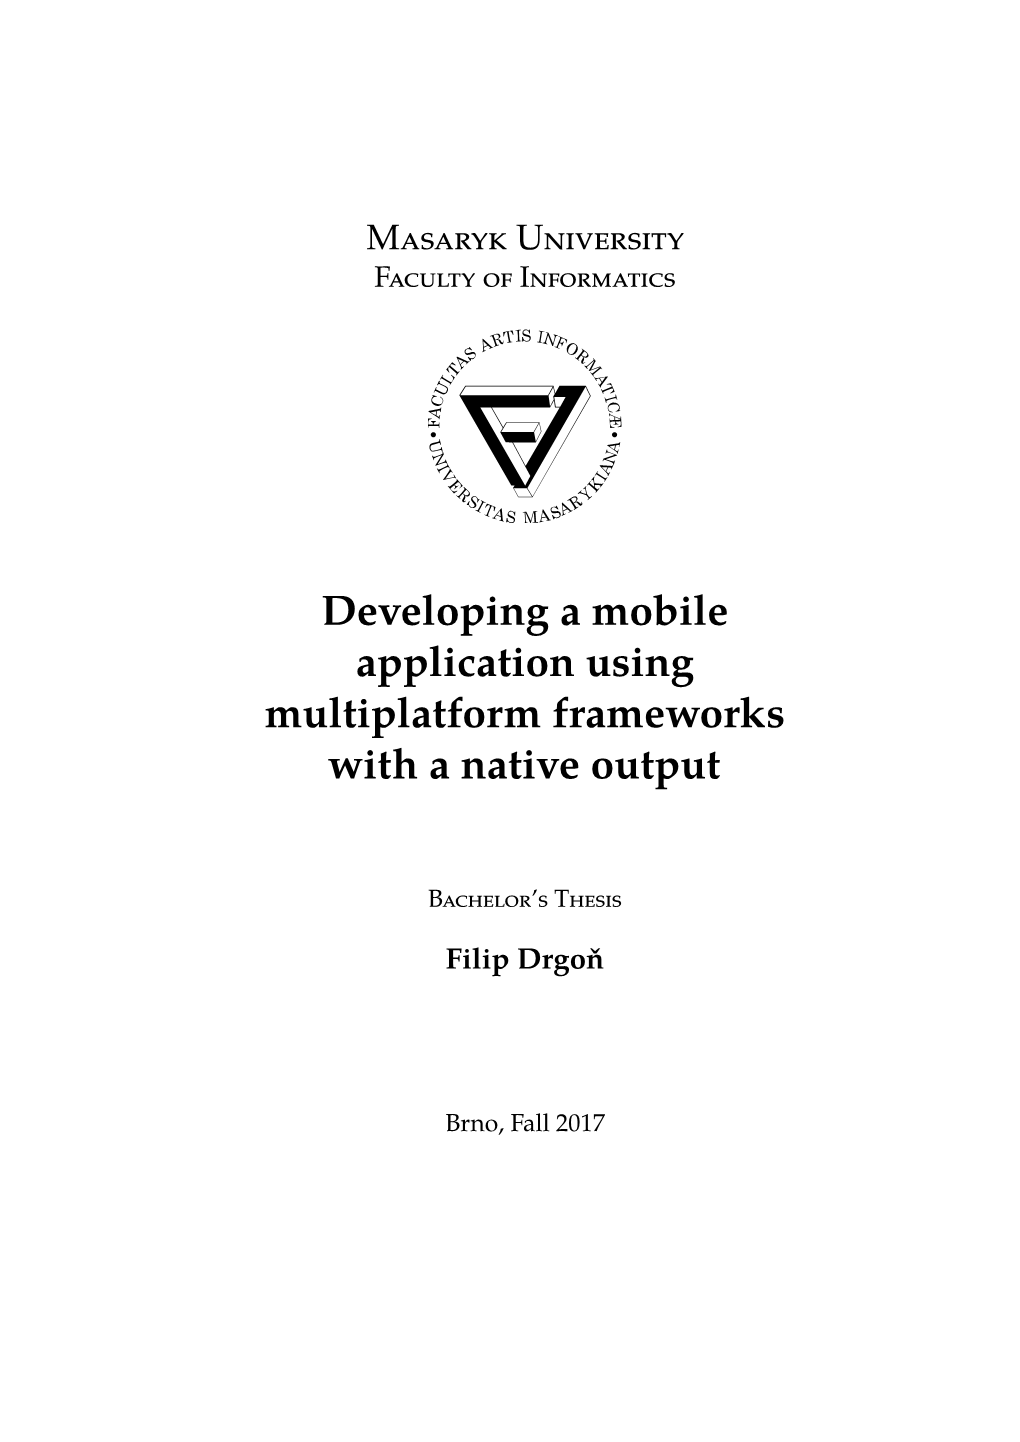 Developing a Mobile Application Using Multiplatform Frameworks with a Native Output